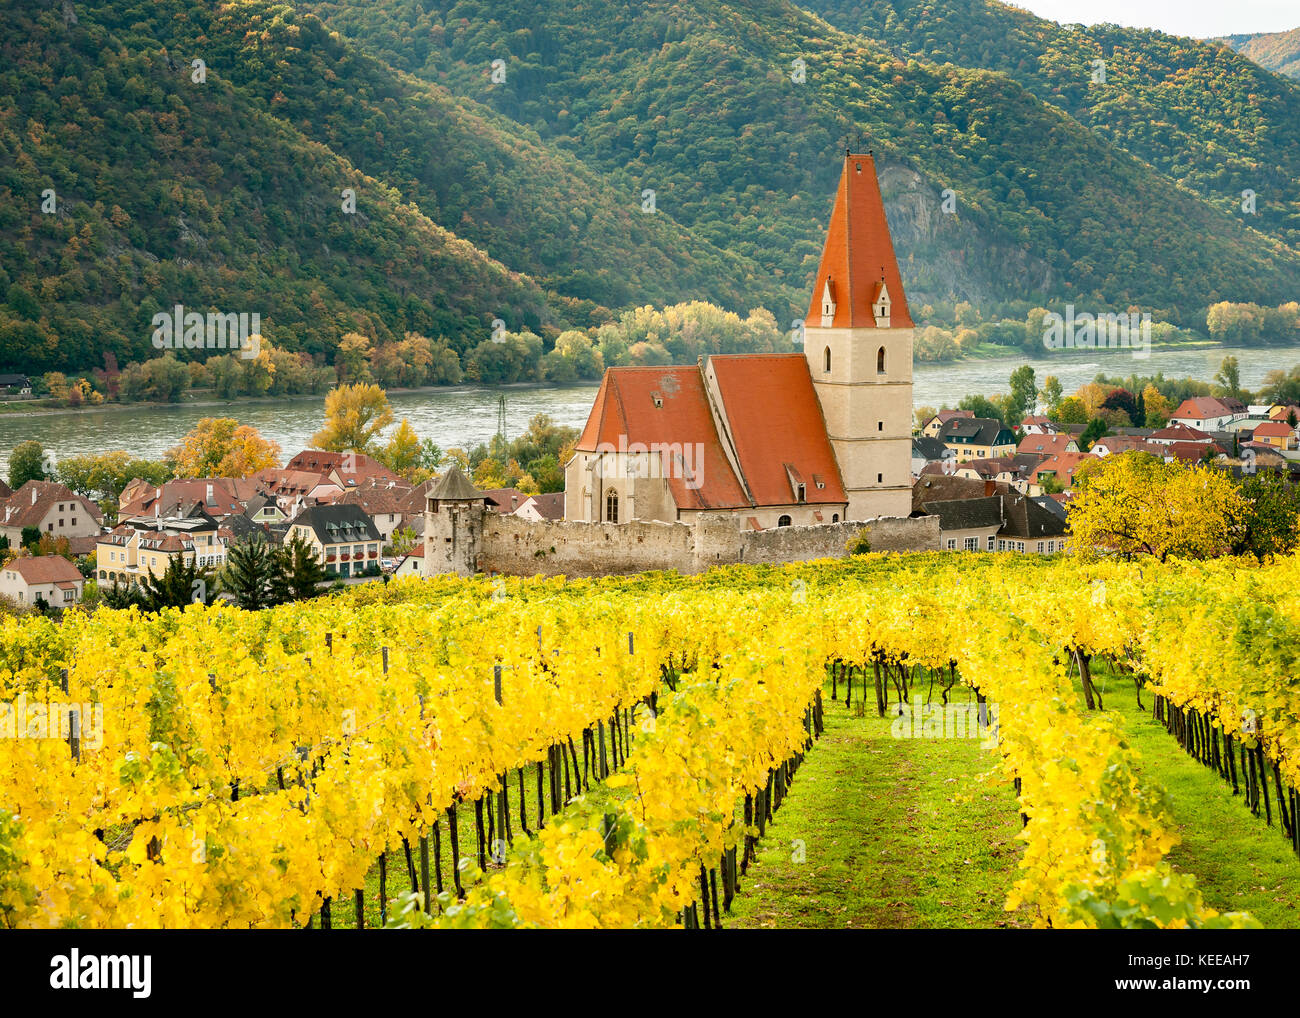 Weissenkirchen Wachau Austria in autumn colored leaves and vineyards on a sunny day Stock Photo